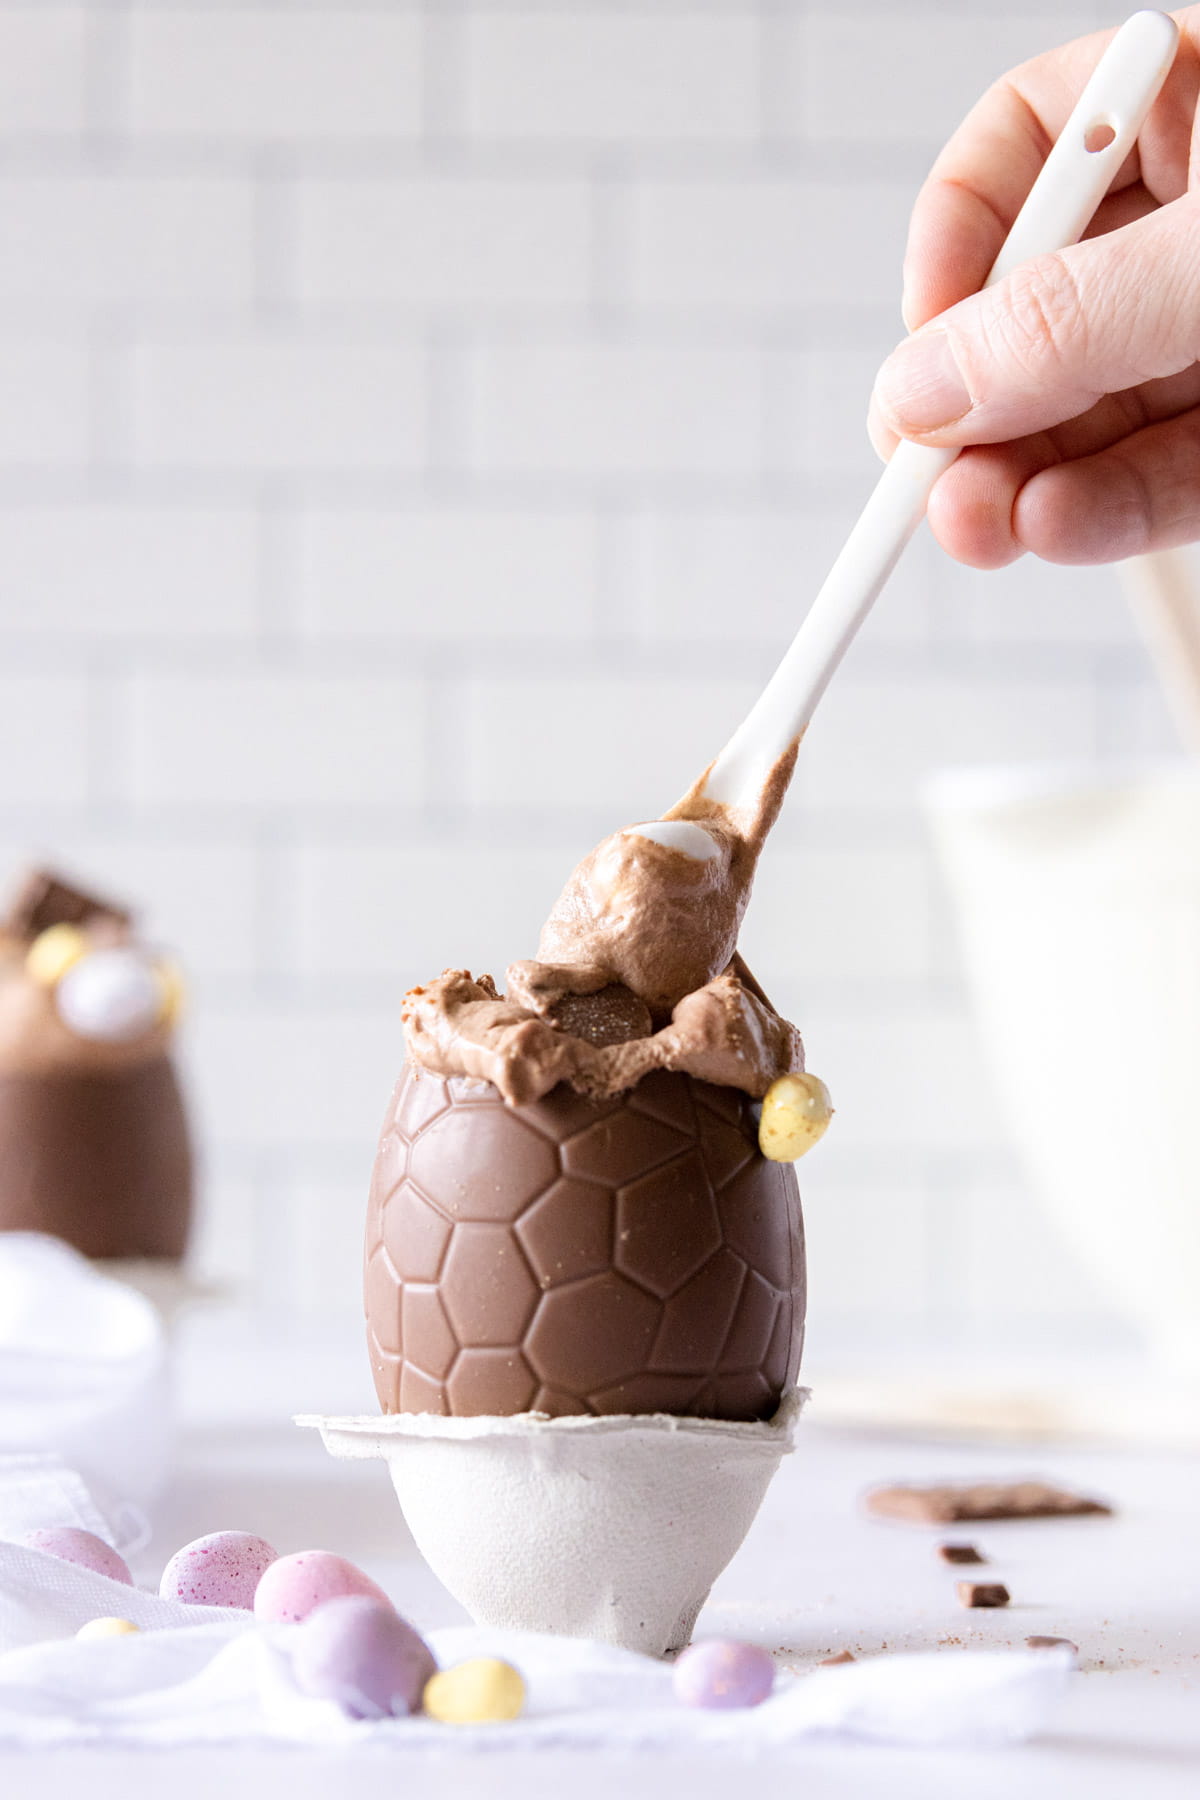 Hand holding a white spoon dipped in chocolate egg mousse